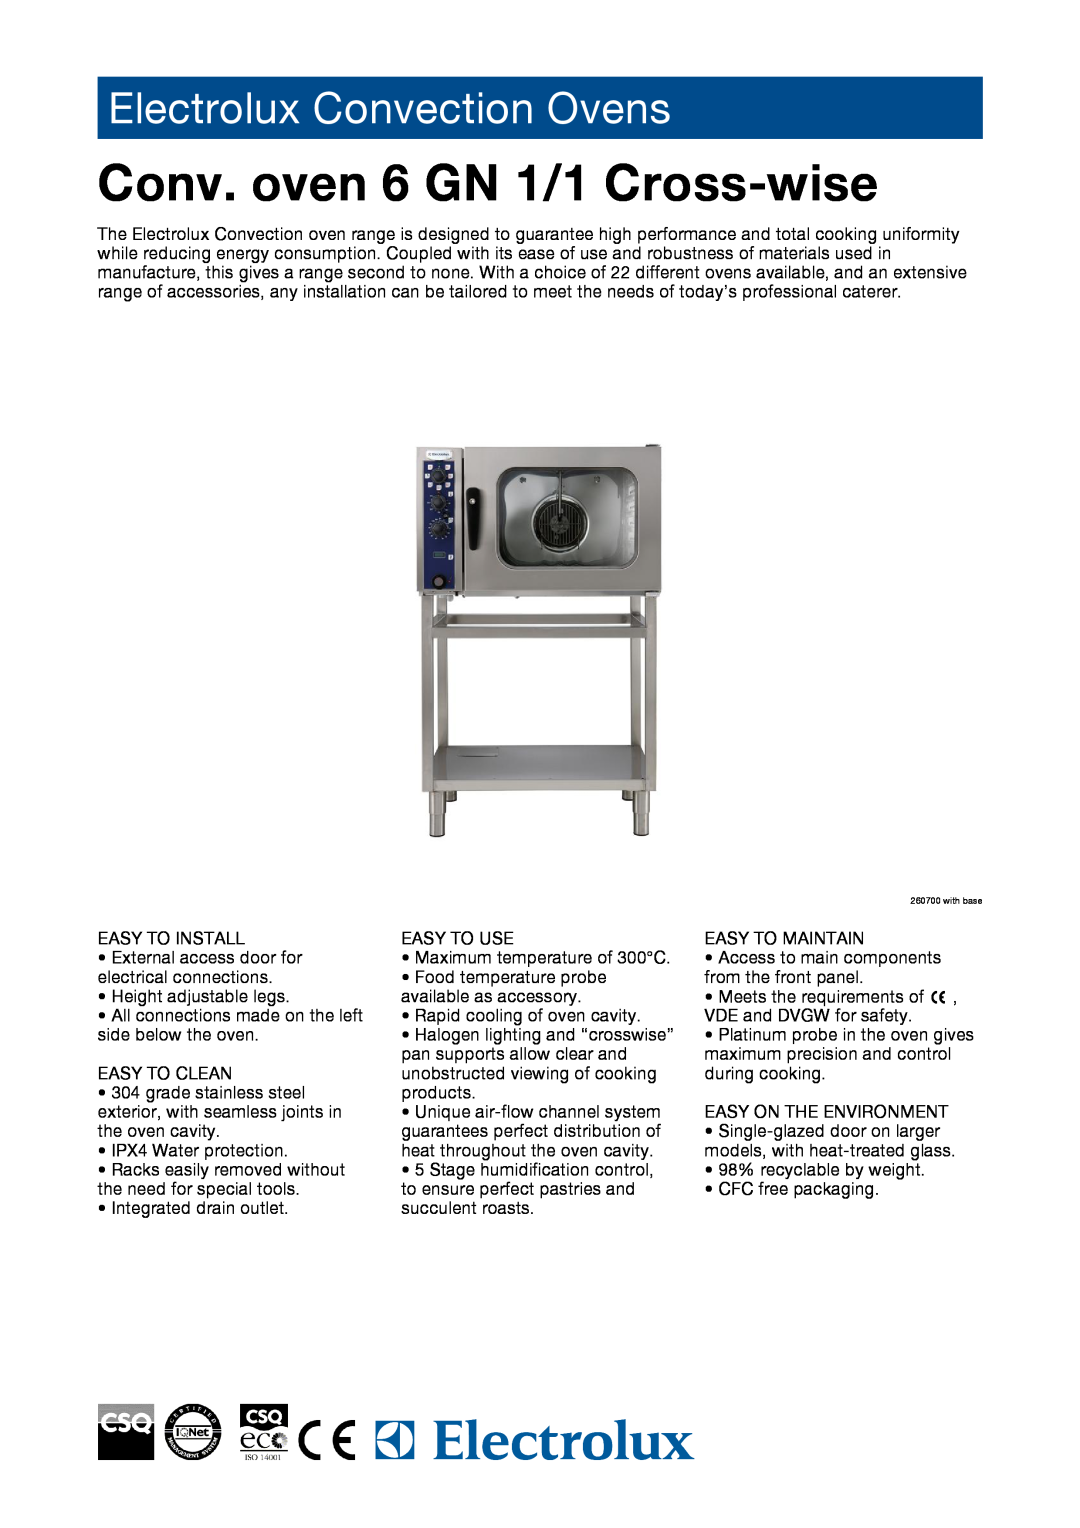 Electrolux FCE06160, FCG06160, 260726, 260700, 260722 manual Conv. oven 6 GN 1/1 Cross-wise, Electrolux Convection Ovens 